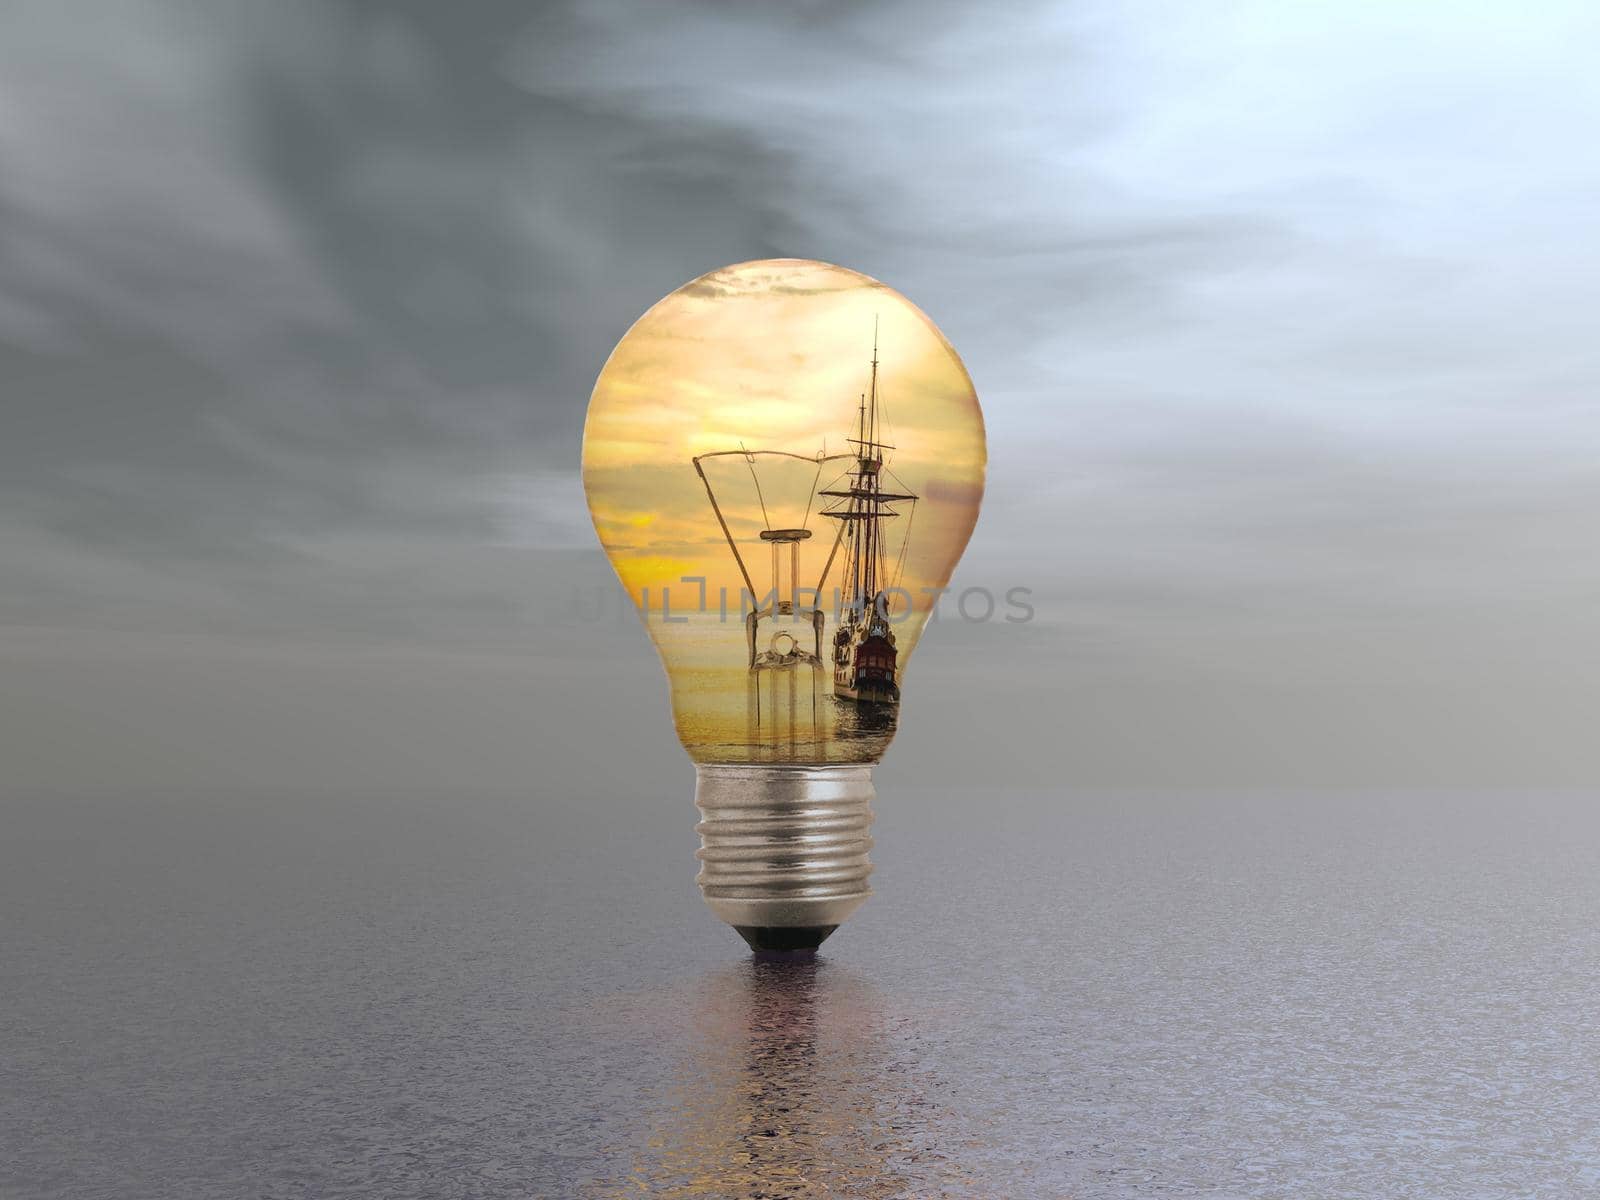 several light bulbs in a dream landscape - 3d rendering by mariephotos